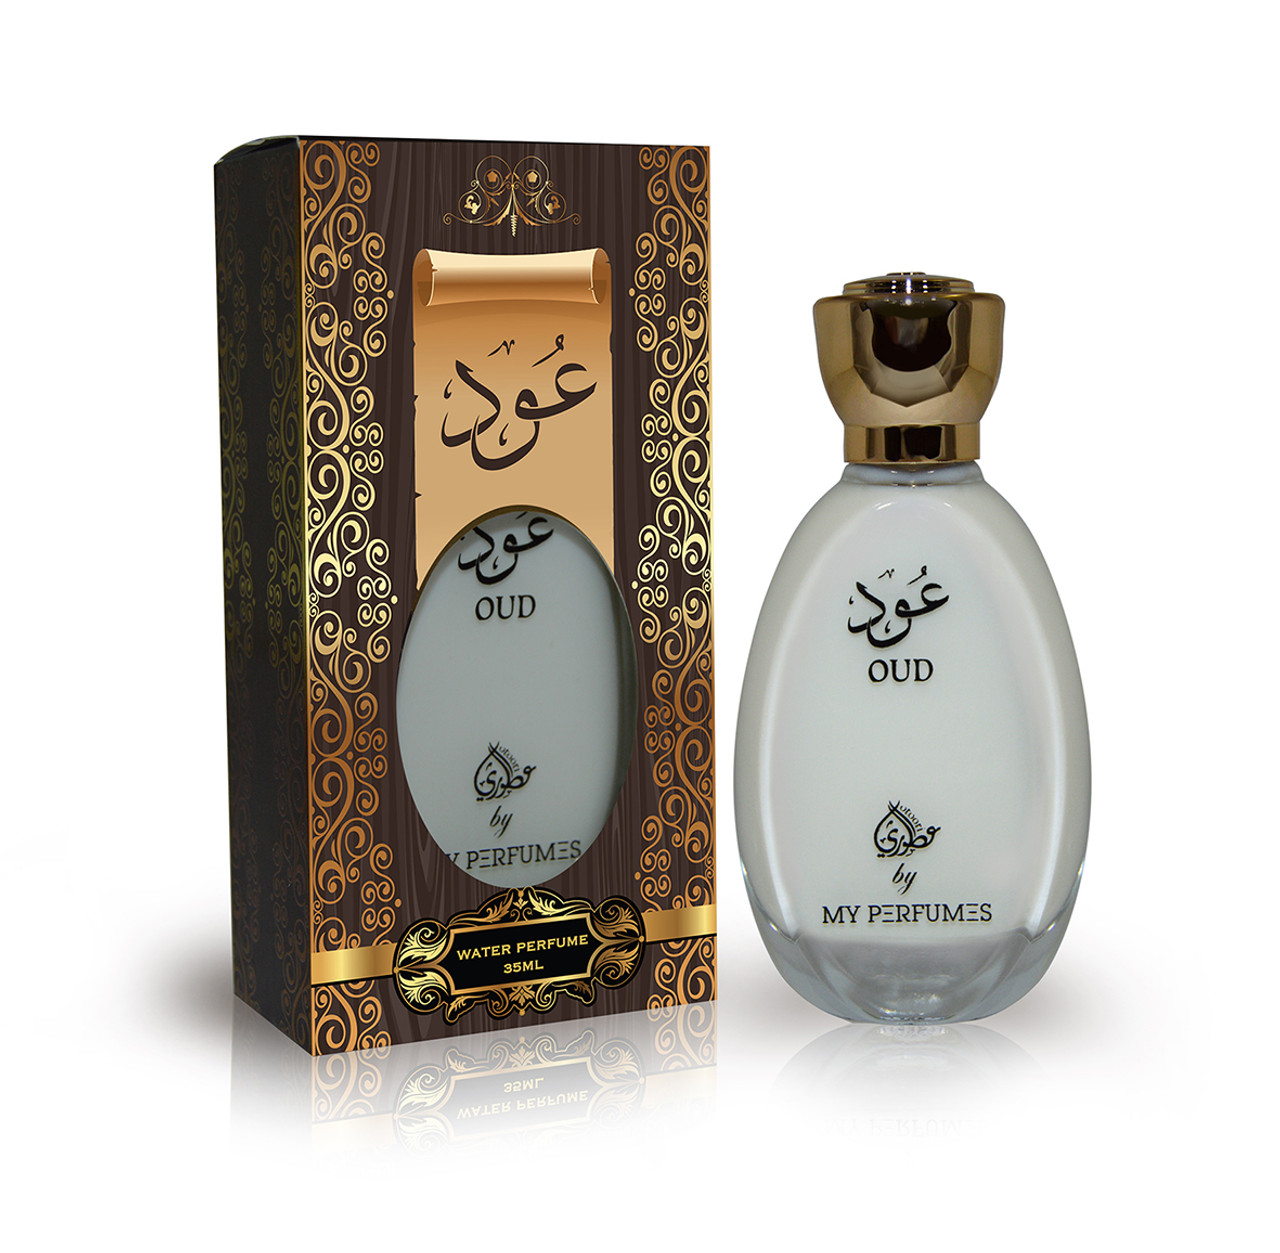 Oud Water Perfume By Otoori of My Perfumes - Available at AttarMist.com